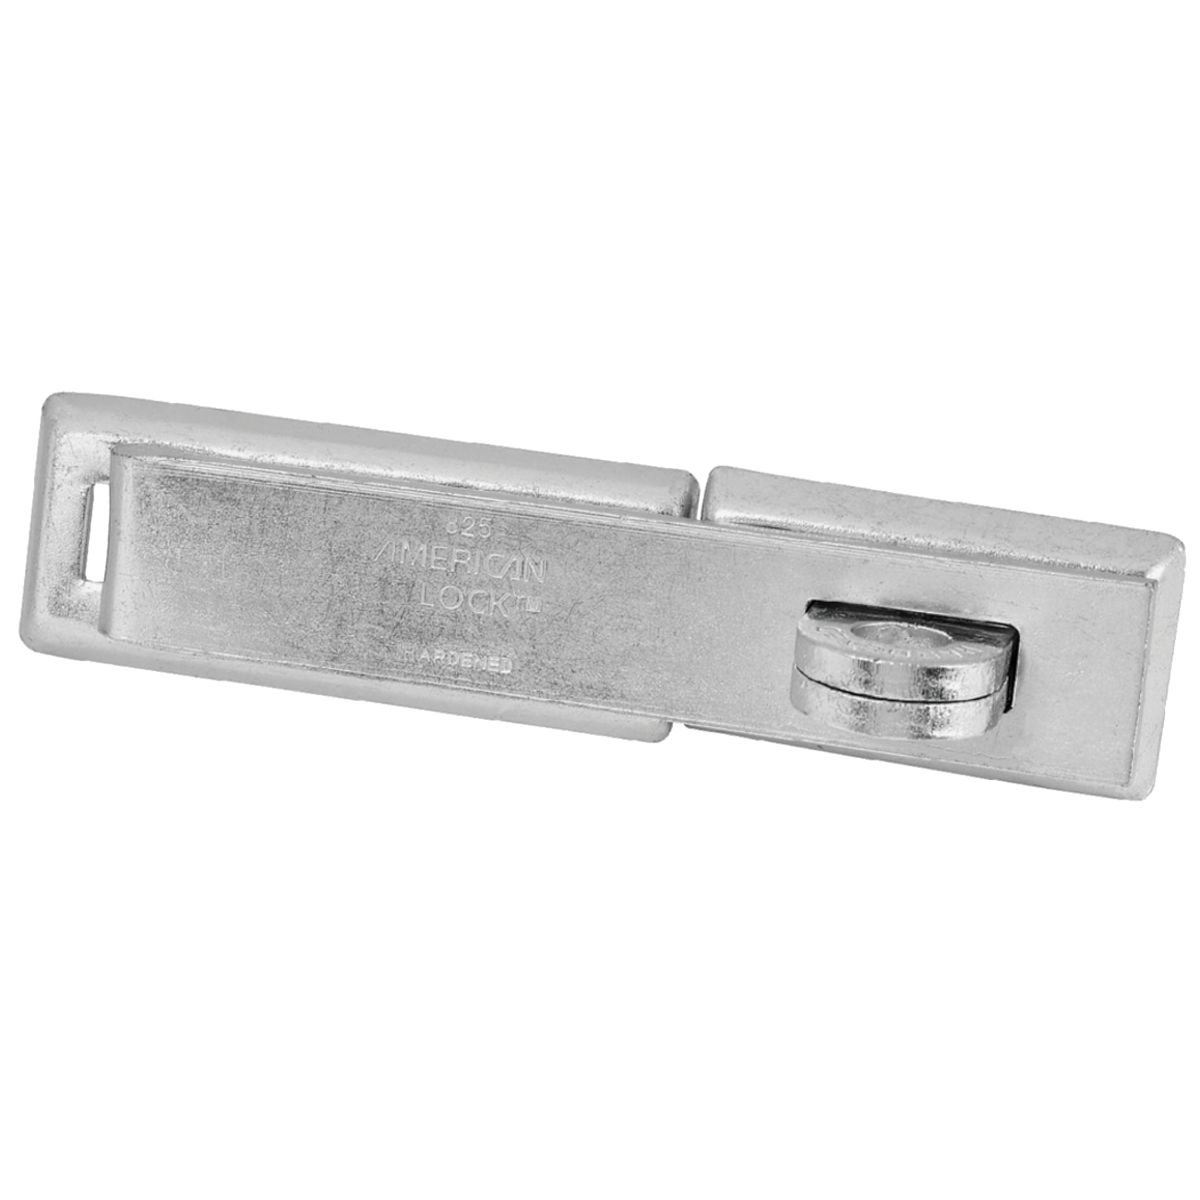 American 7-1/4" Safety Hasp